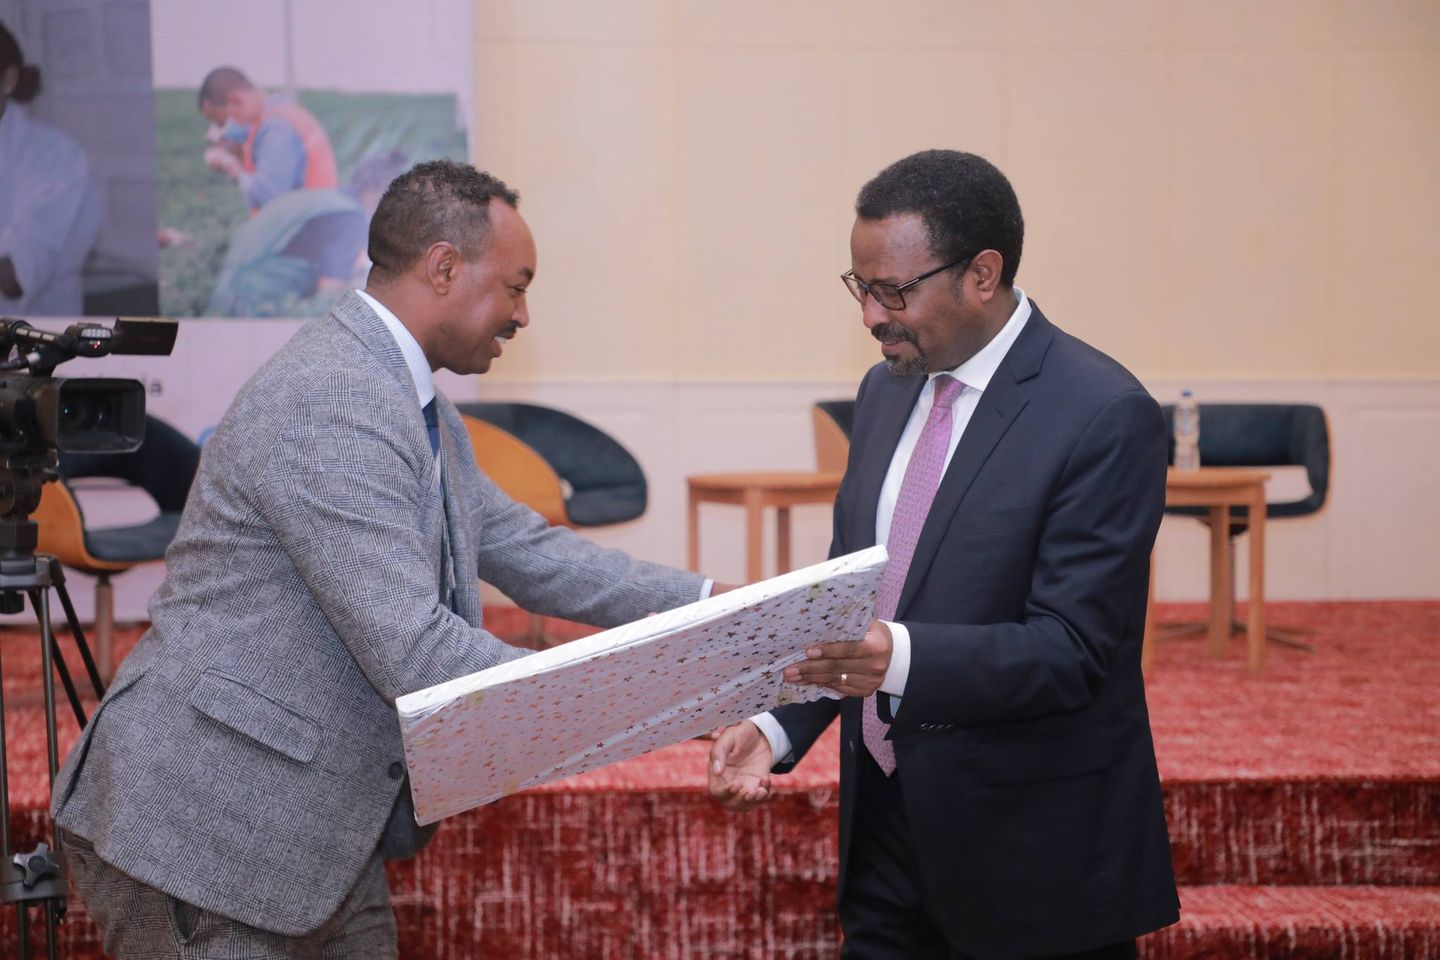 EHPEA Recognized for Championing Plant Health in Ethiopian Horticulture